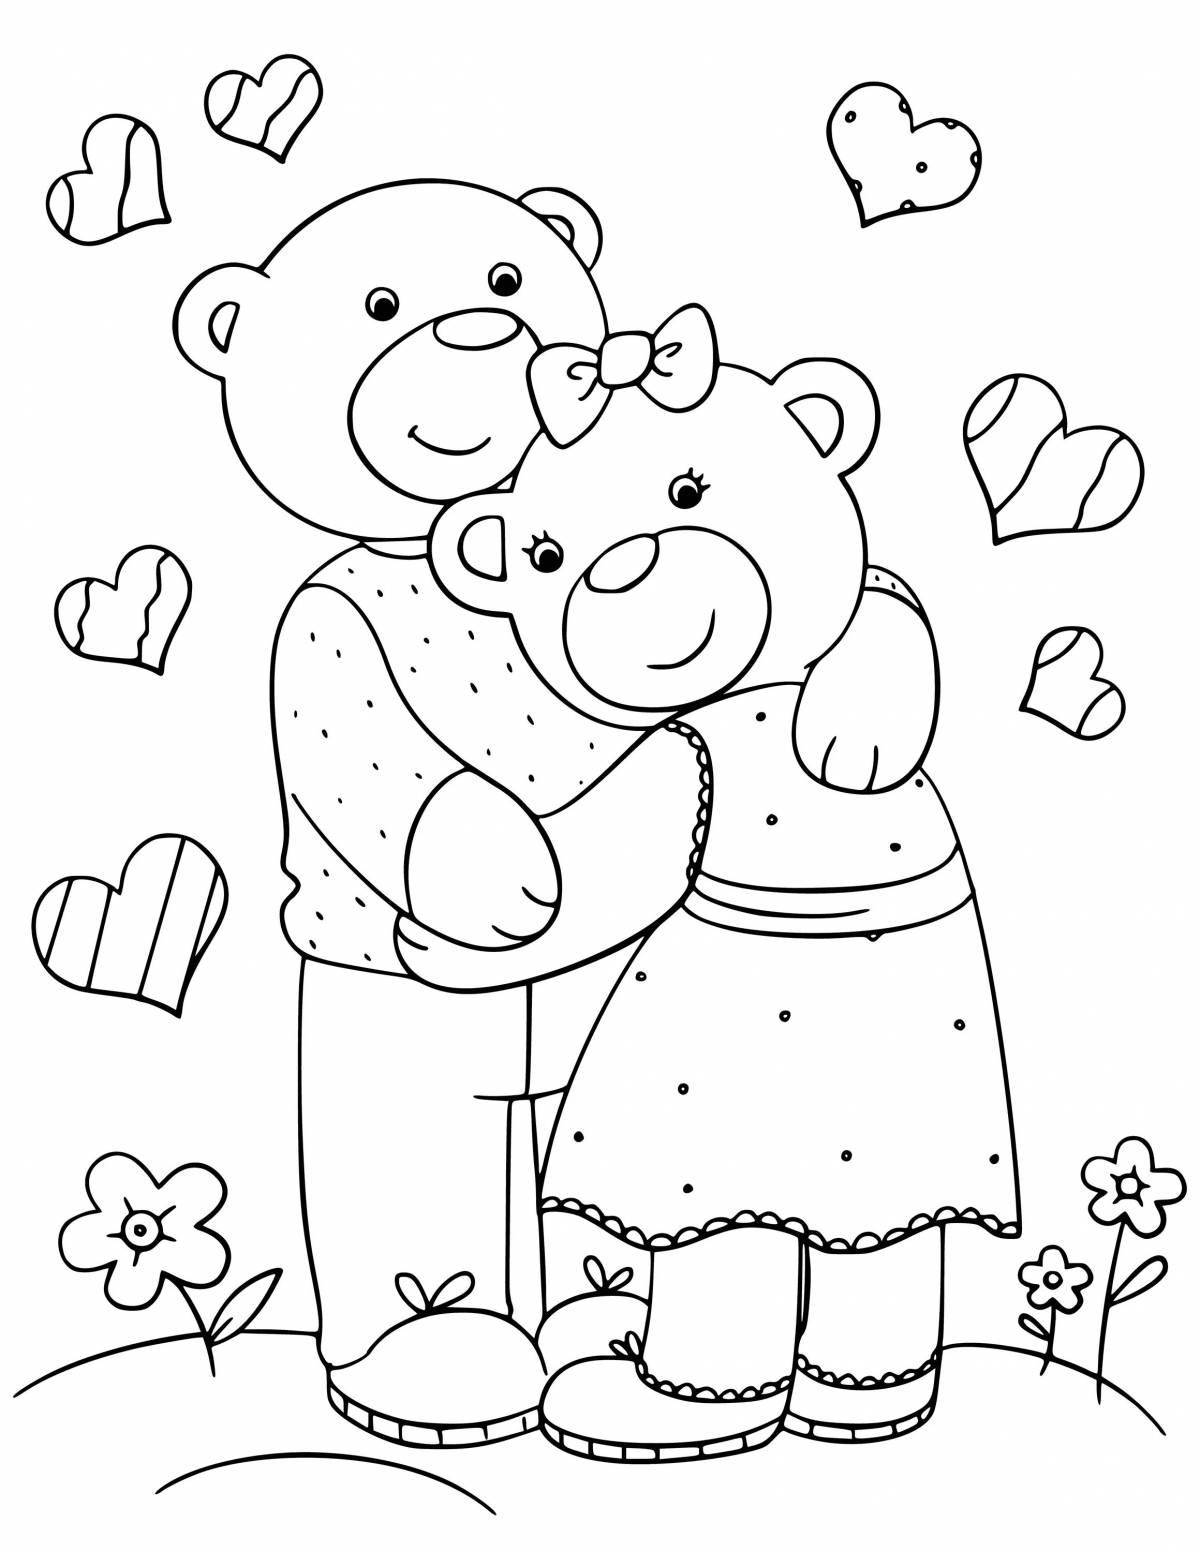 Embracing peaceful coloring pages